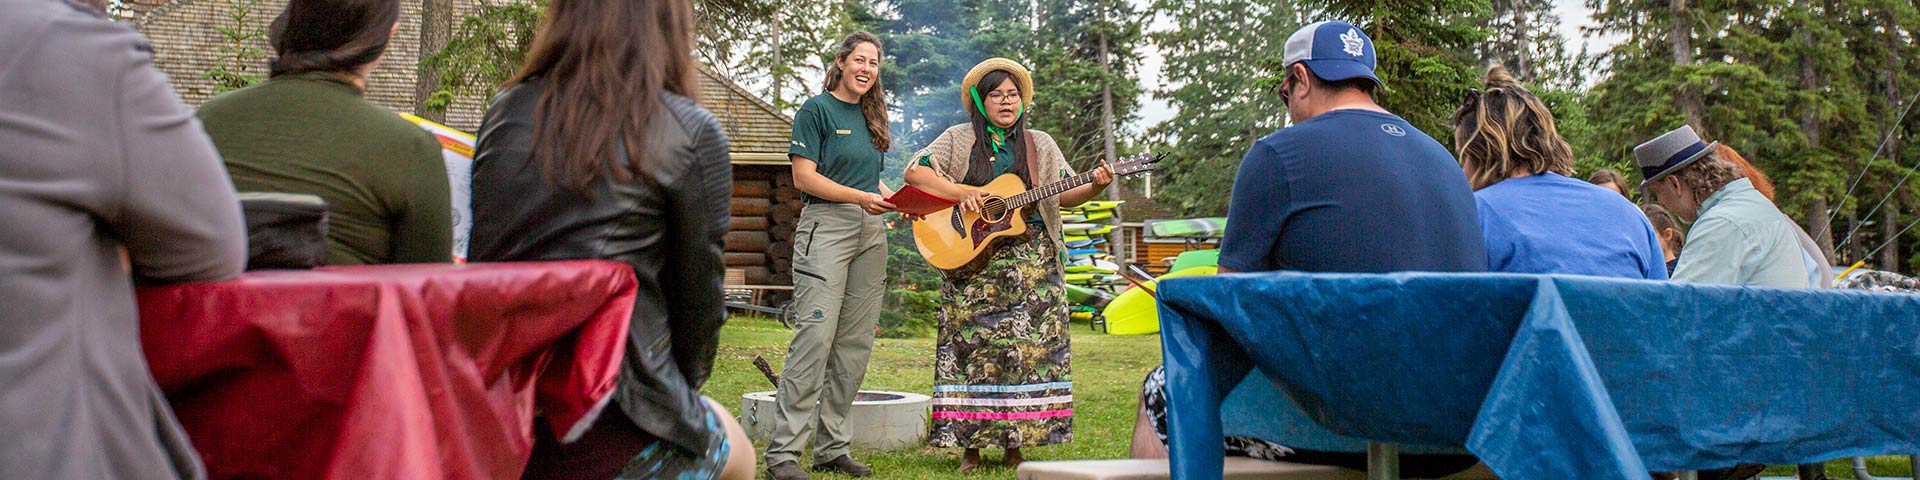 Parks Canada Interpreters preform a summer interpretive campfire program to visitors at the Tipi at the Grey Owl Centre in the townsite of Waskesiu in Prince Albert National Park.